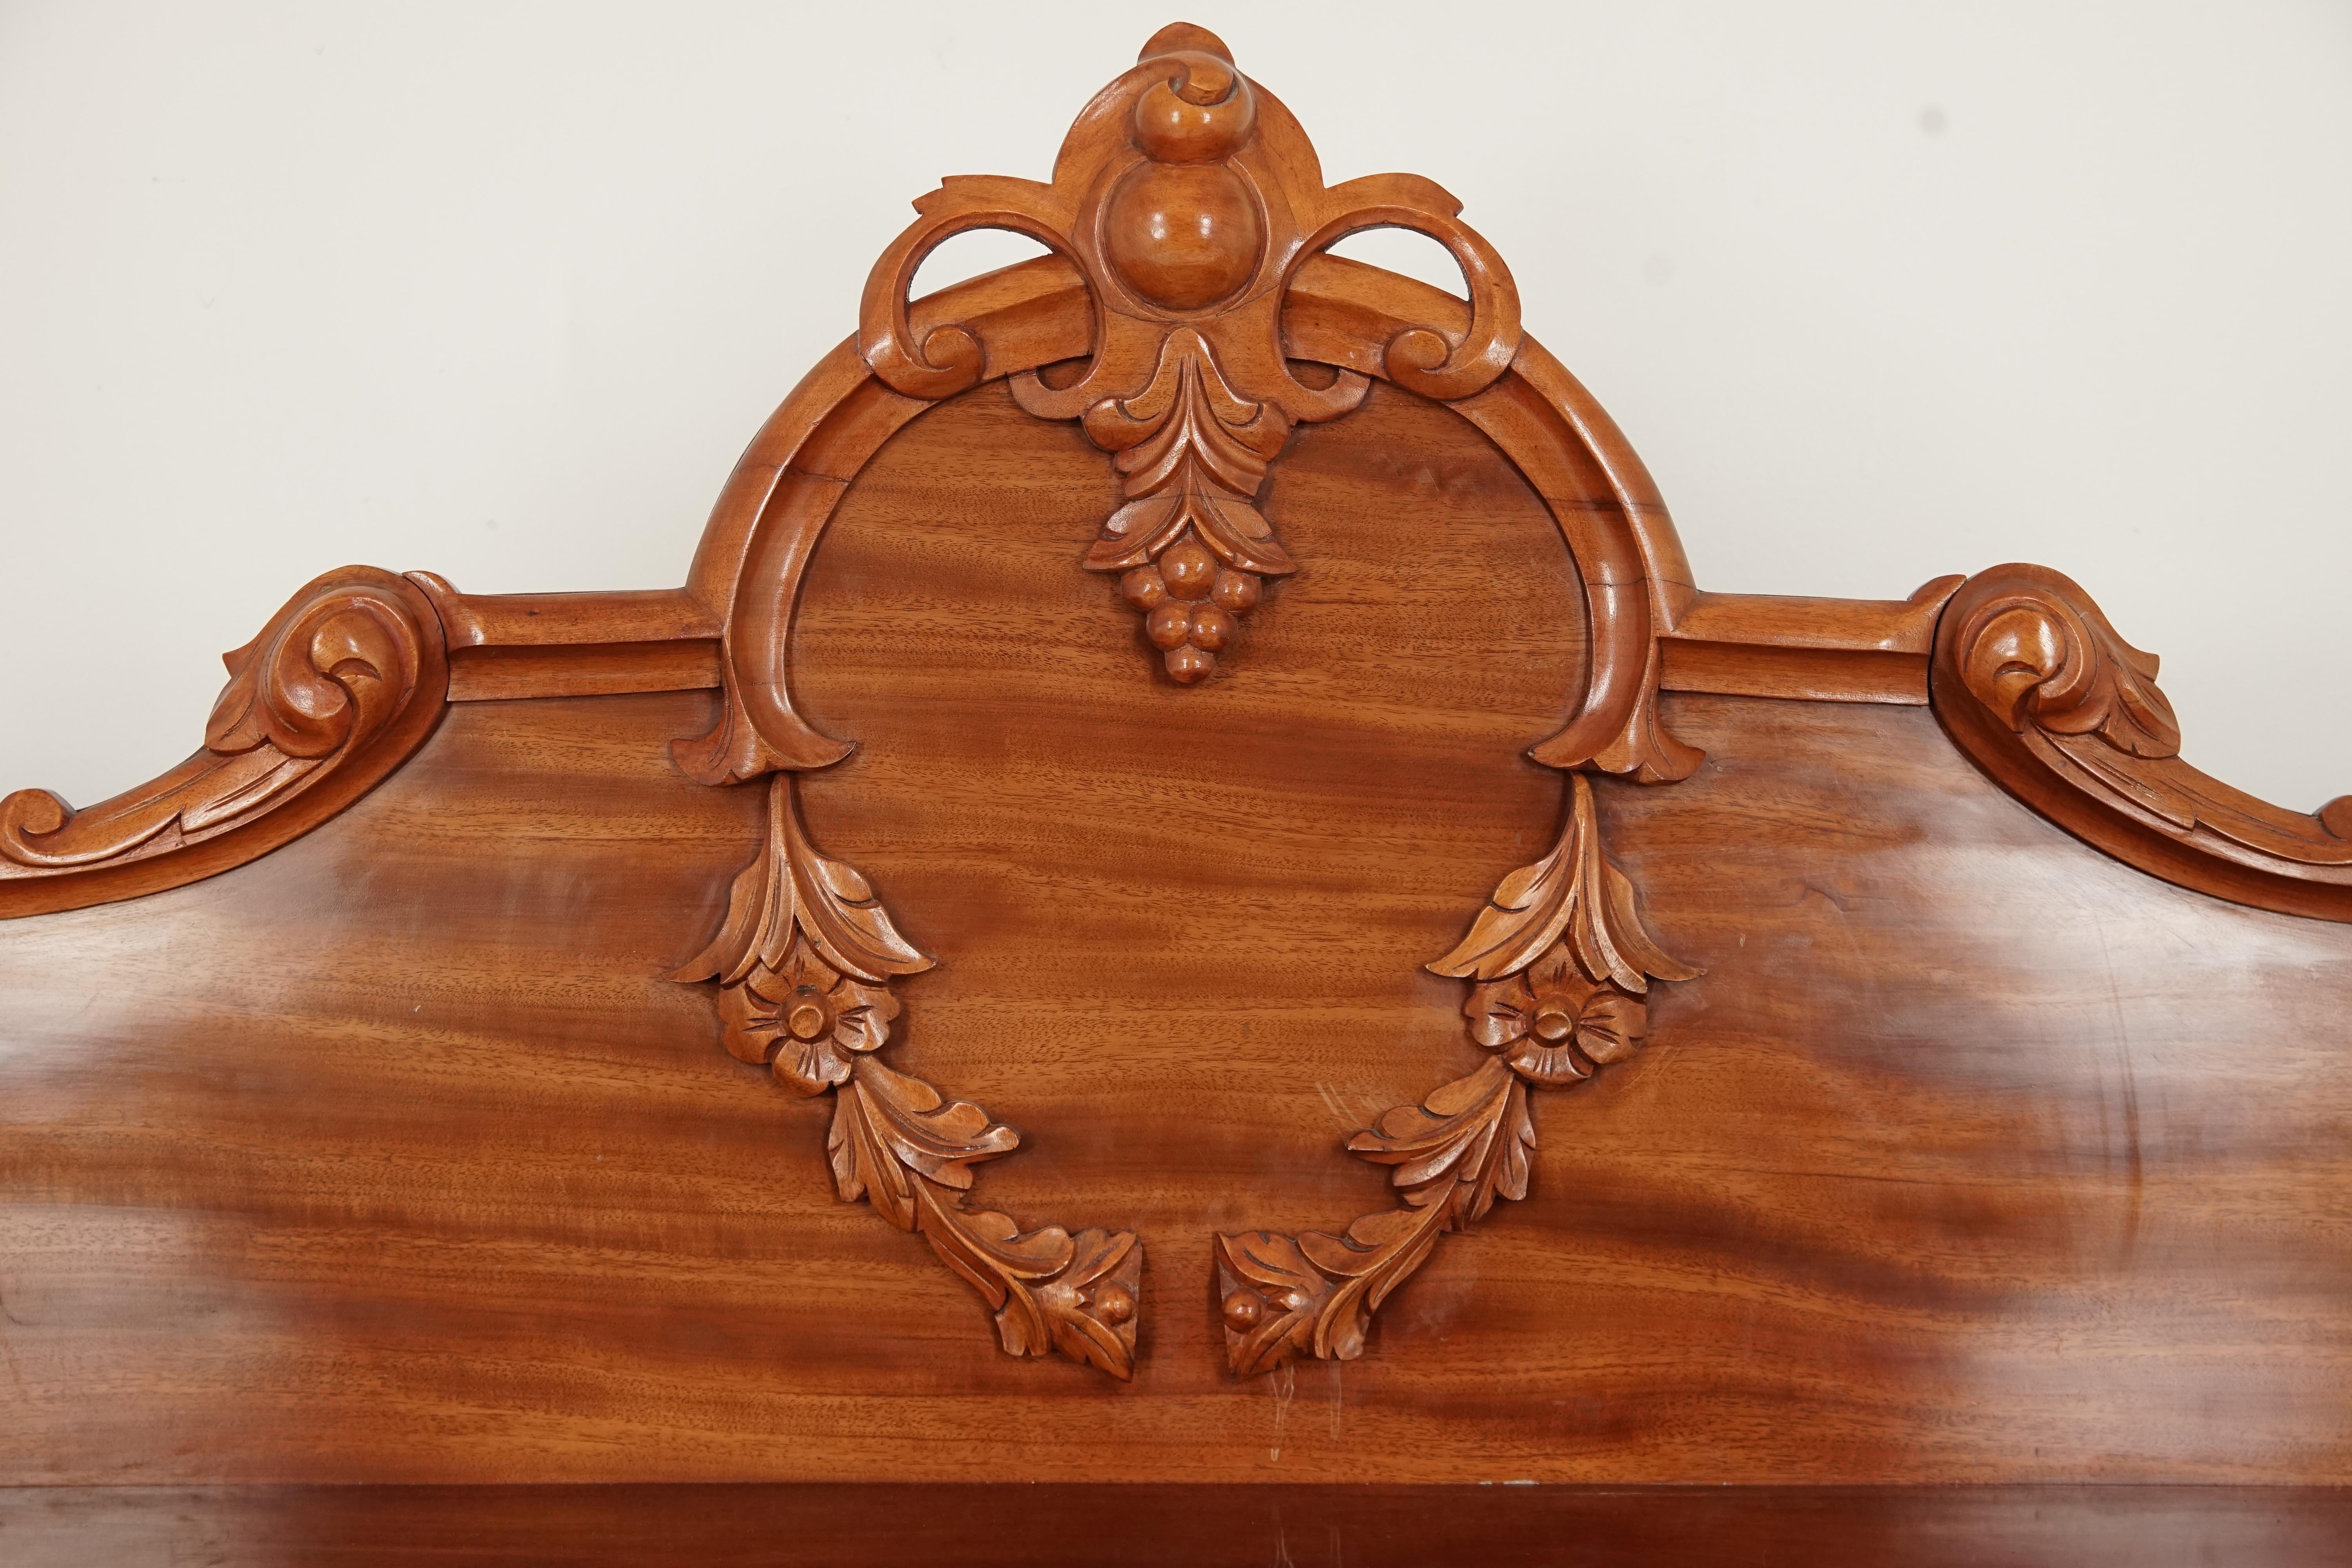 Antique Victorian Carved Mahogany Sideboard, Buffet, Chiffonier, Scotland 1870, B2748

Scotland 1870
Solid Mahogany and veneers
Original finish
Having a shaped carved back
Quality mahogany moulded top
Fitted with 3 drawers over 4 paneled doors
Opens